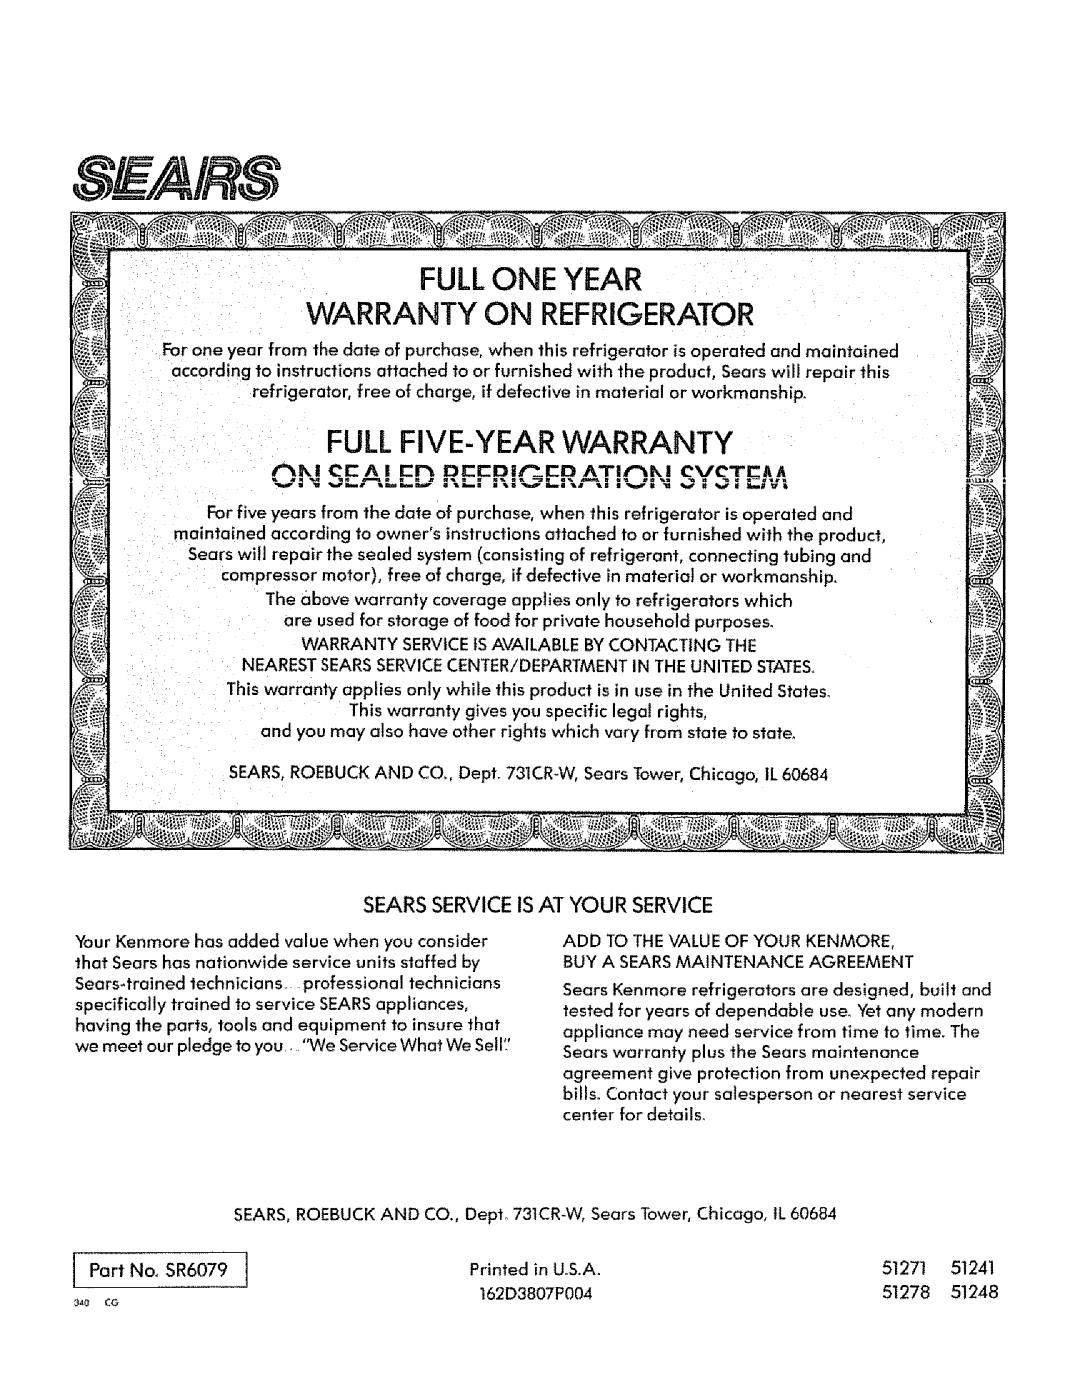 Sears 51278, 51271 manual Fullone Year Warranty On Refrigerator, Full Five-Yearwarranty, Sears Service Is At Your Service 